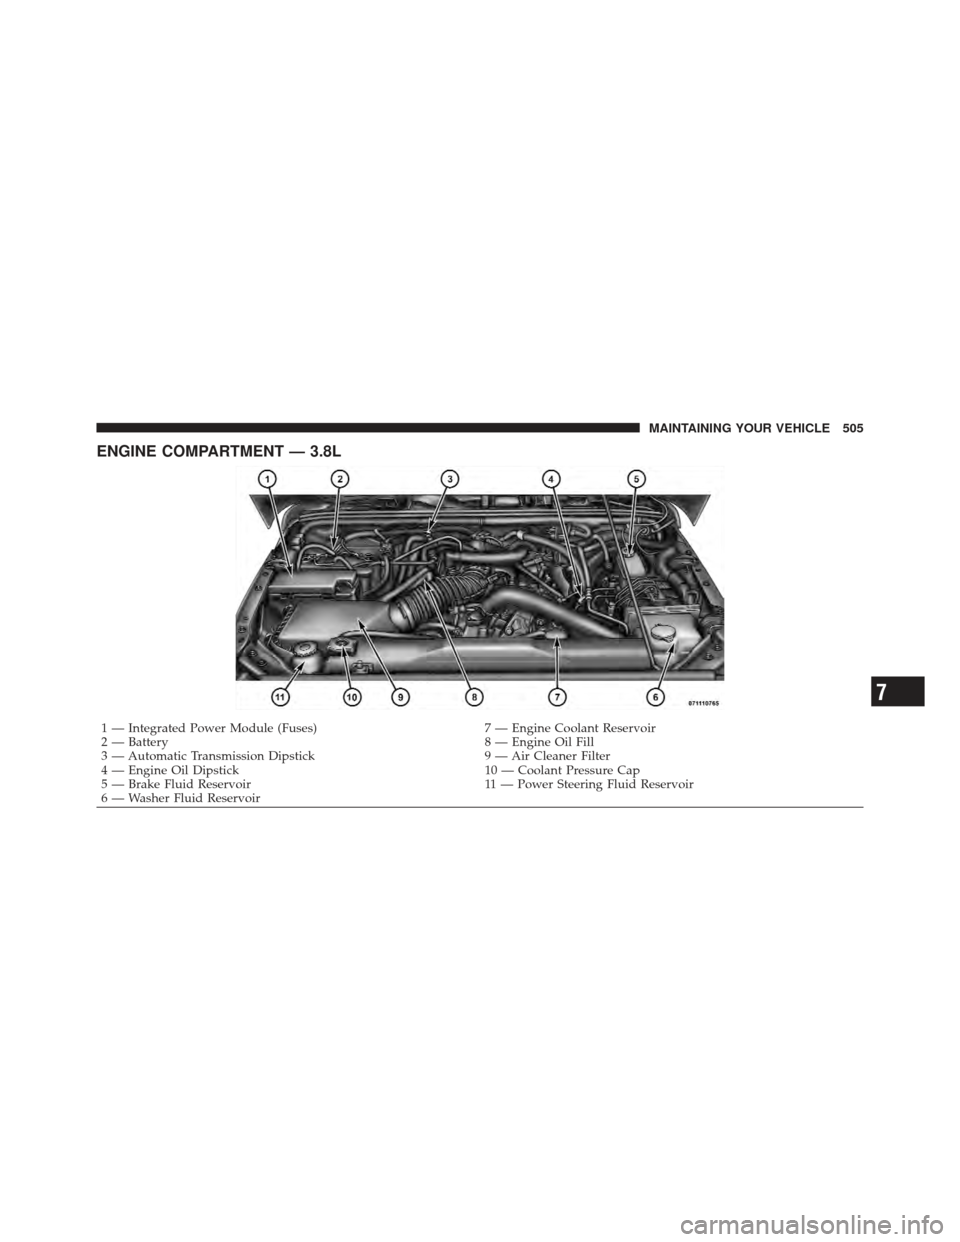 JEEP WRANGLER 2011 JK / 3.G Owners Manual ENGINE COMPARTMENT — 3.8L
1 — Integrated Power Module (Fuses)7 — Engine Coolant Reservoir
2 — Battery 8 — Engine Oil Fill
3 — Automatic Transmission Dipstick 9 — Air Cleaner Filter
4 —